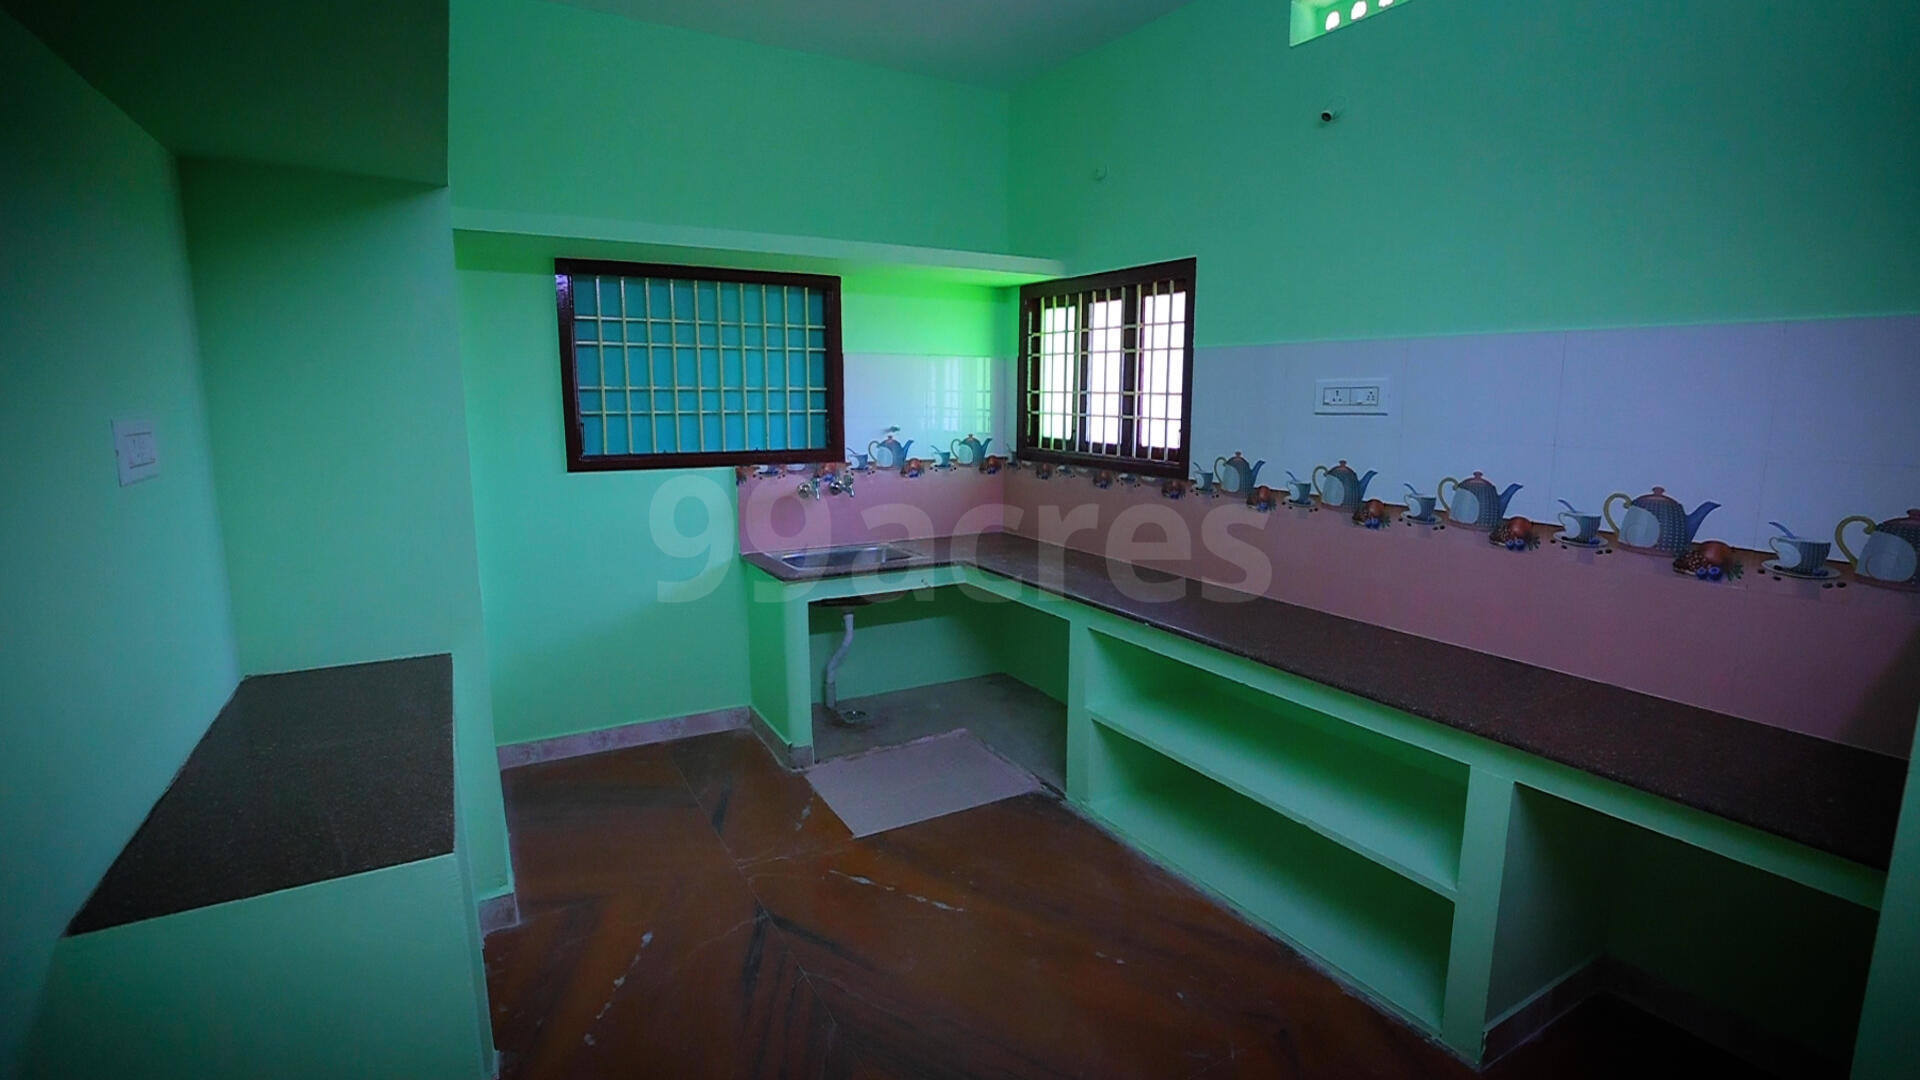 7988-for-sale-3BHK-Residential-Independent-House-Rs-8500000-in-Villianur-Villianur-Puducherry